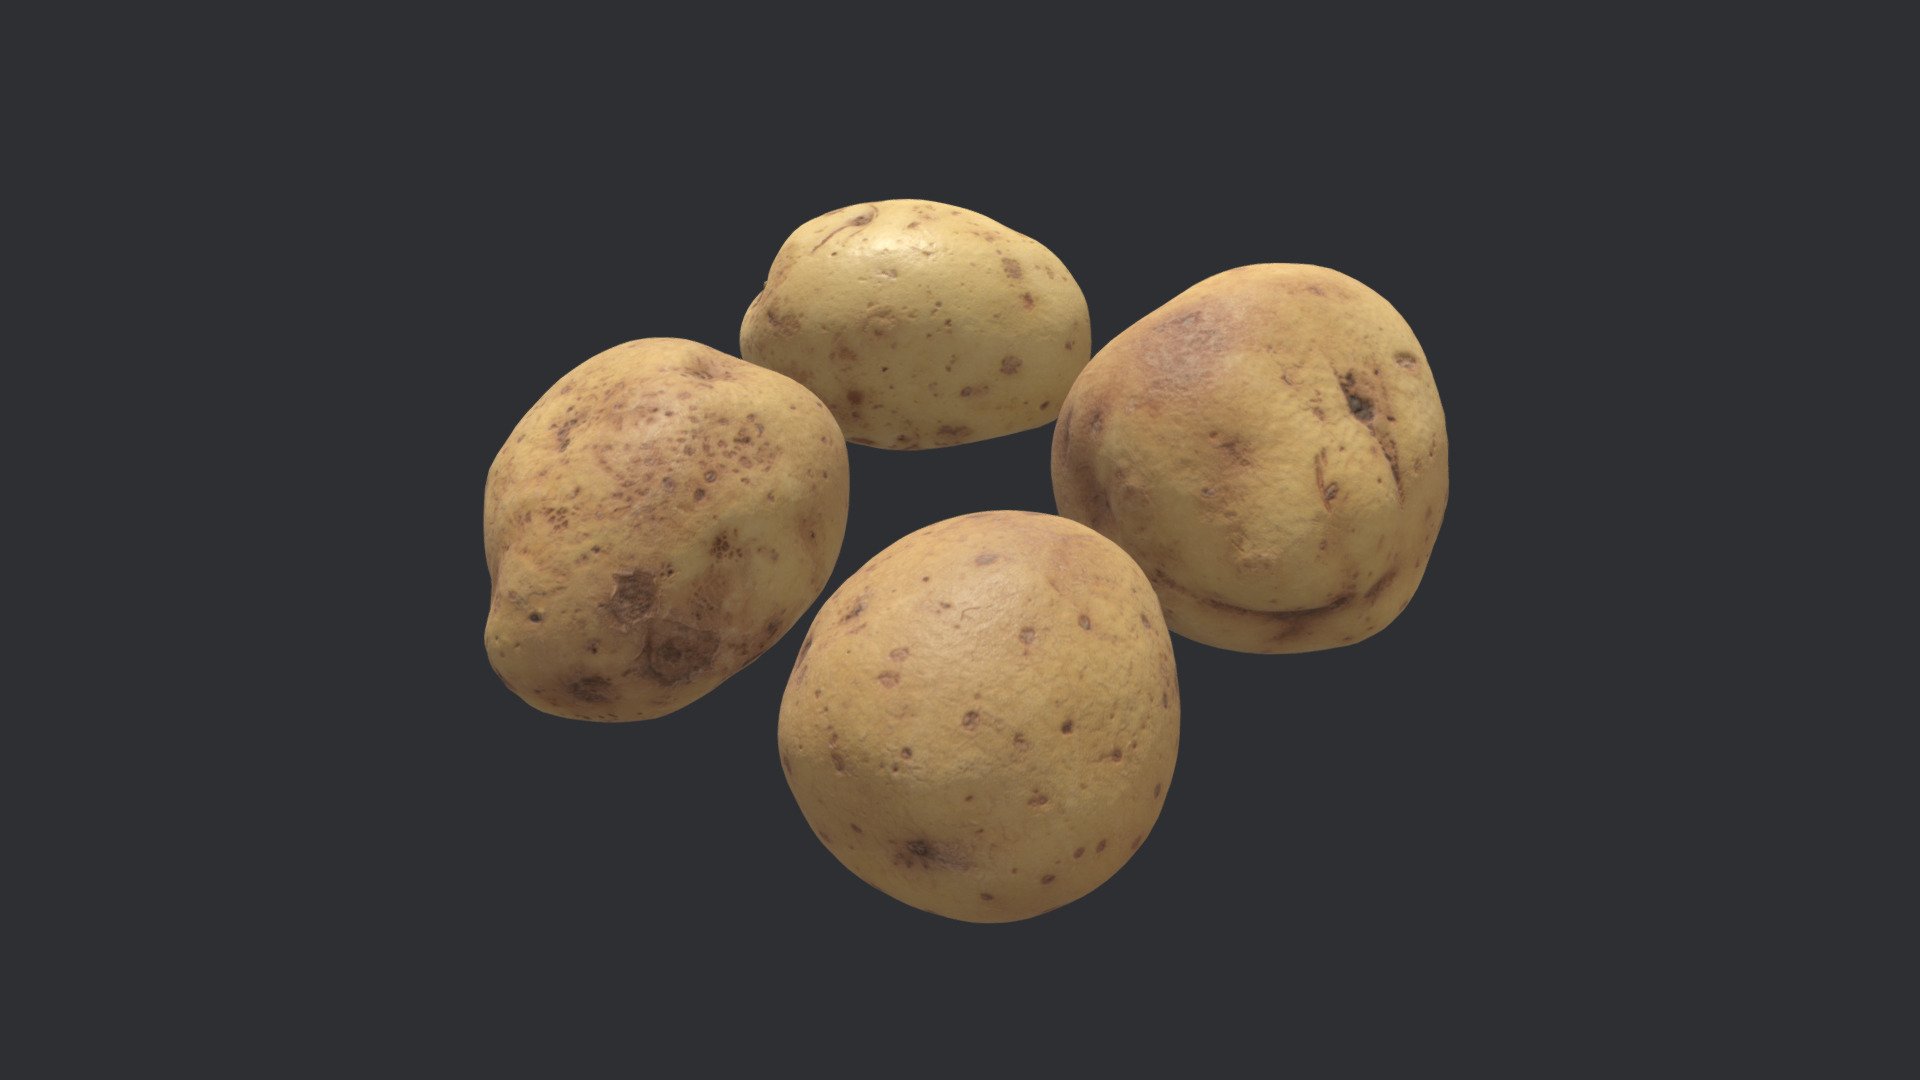 Four individual photogrammetry models of Maris Piper potatoes.

All models retopologized/optimized into quads with clean UVs.

Each model has it’s own 4K PNG textures (Diffuse, Normal, Roughness and Ambient Occlusion).

2K JPG textures used for 3D preview.

Real world scale 3d model